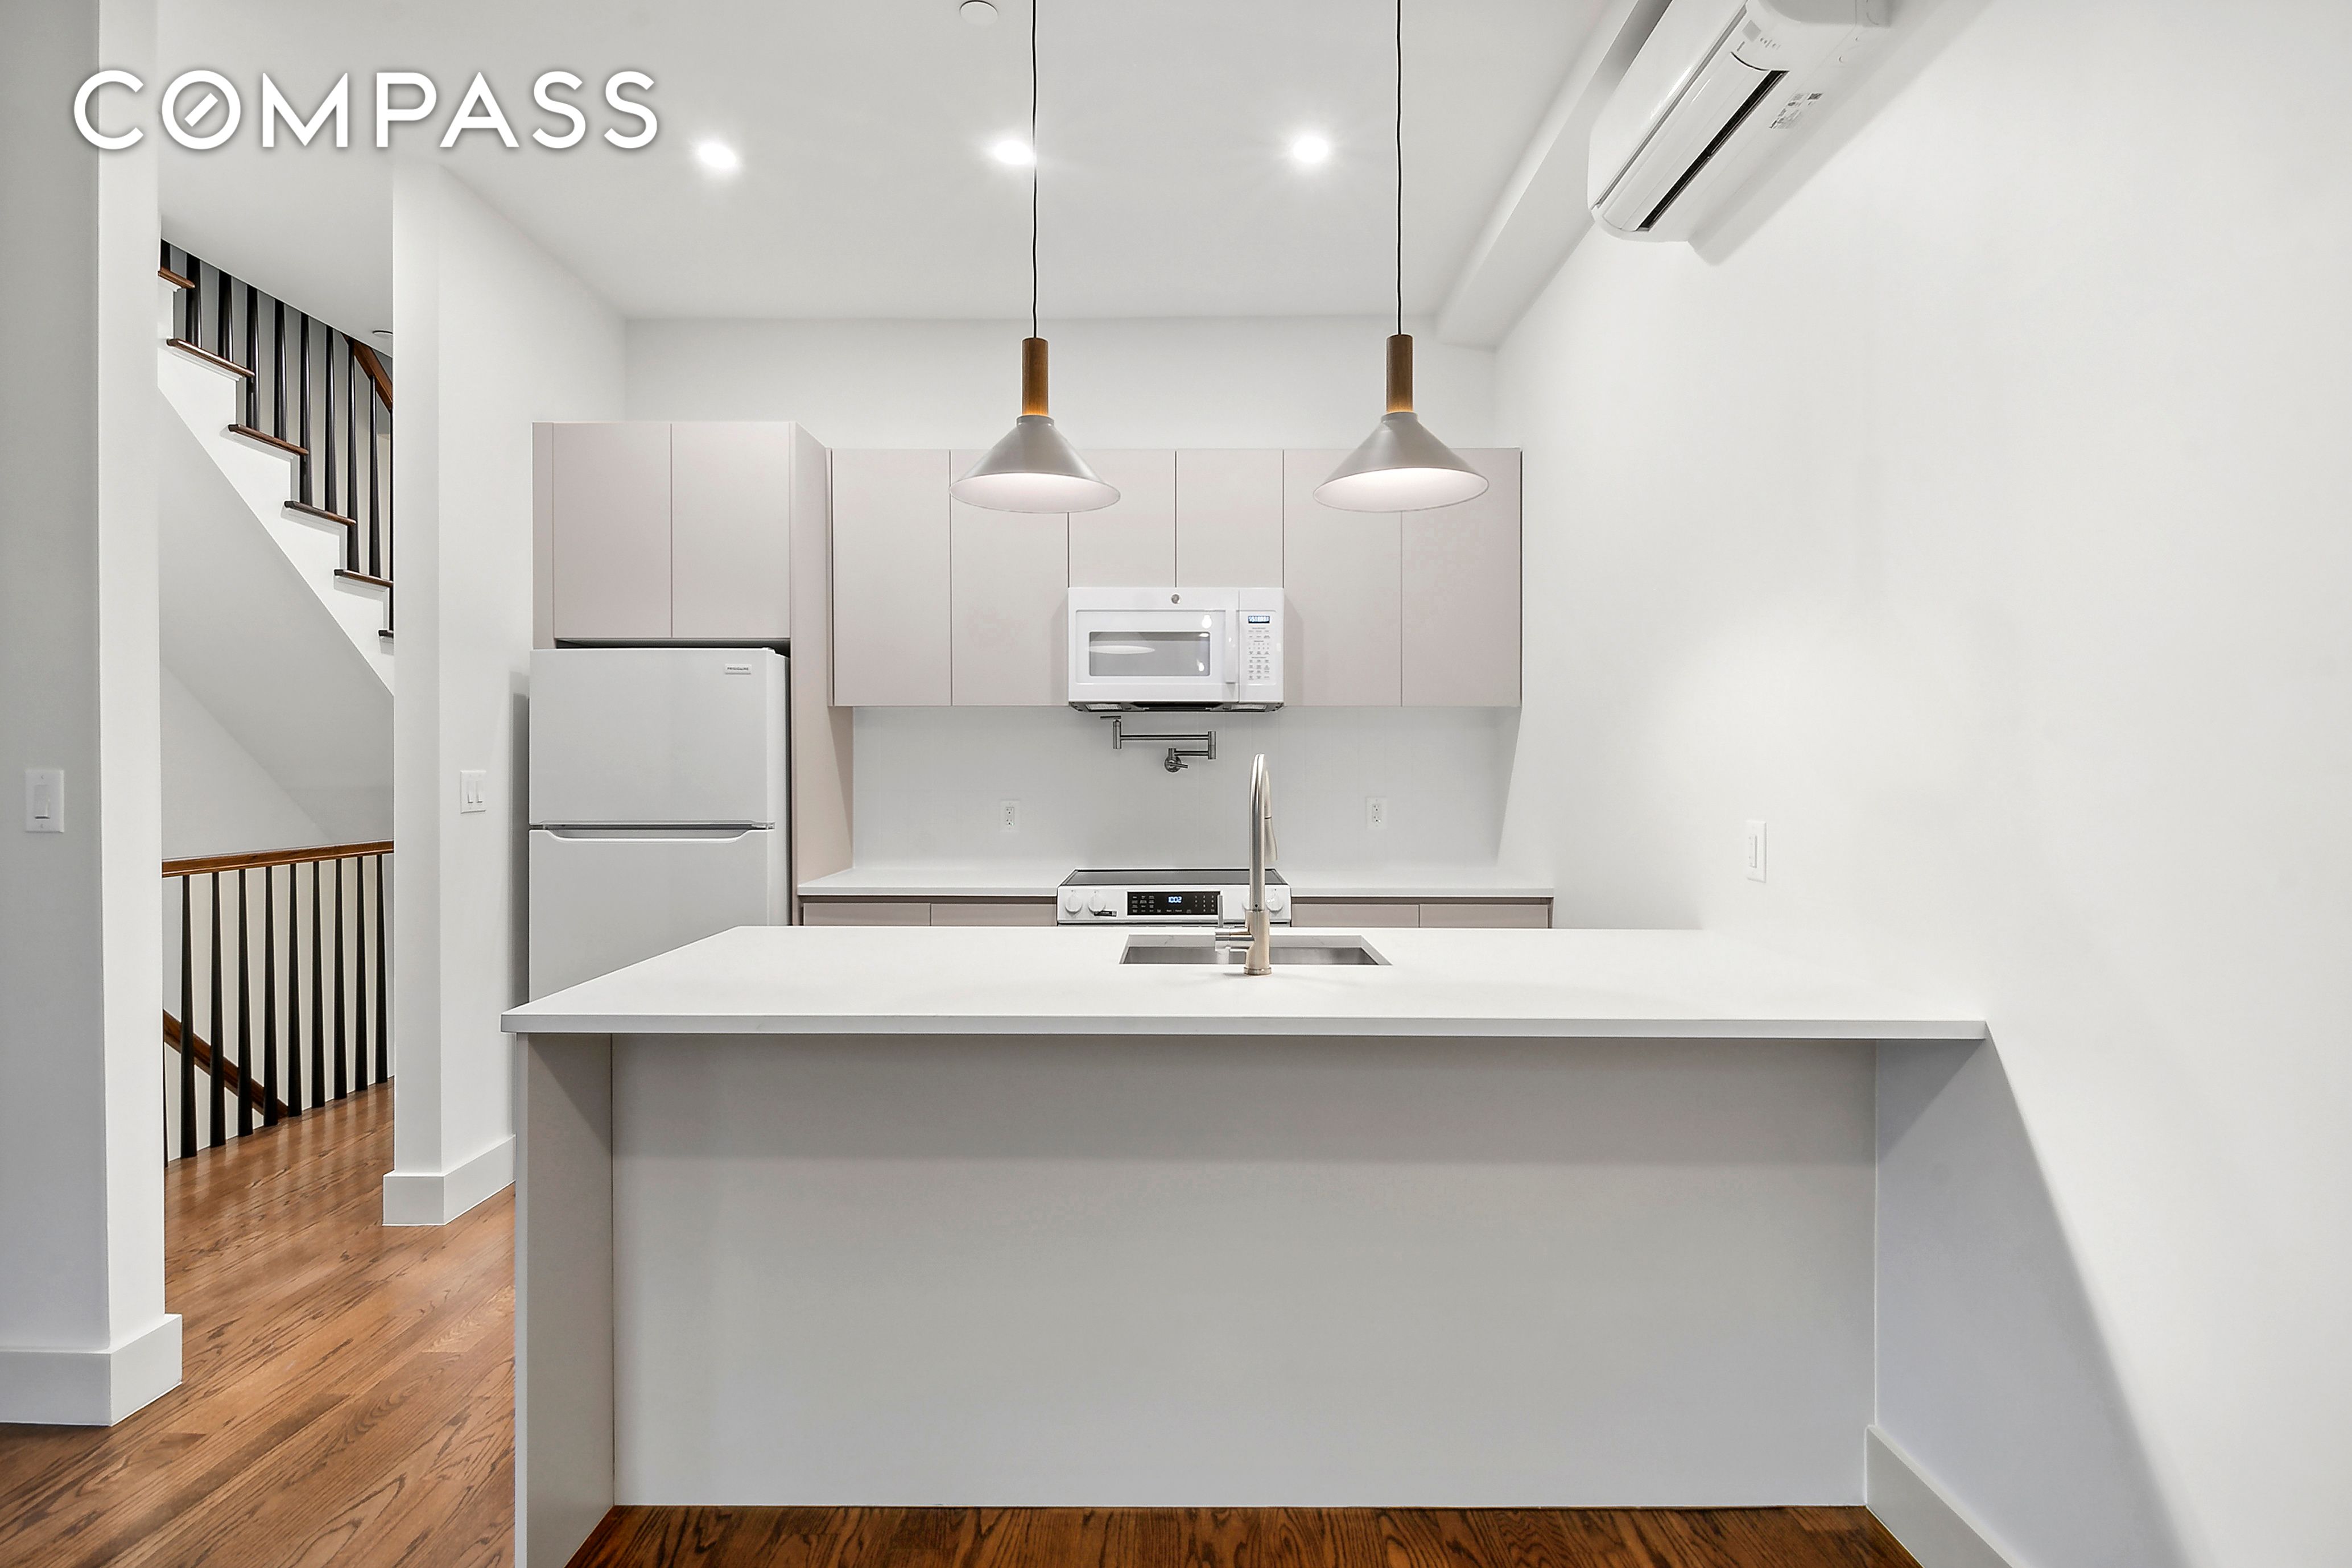 11 Brevoort Place 2, Bedford-Stuyvesant, Downtown, NYC - 3 Bedrooms  
3 Bathrooms  
9 Rooms - 